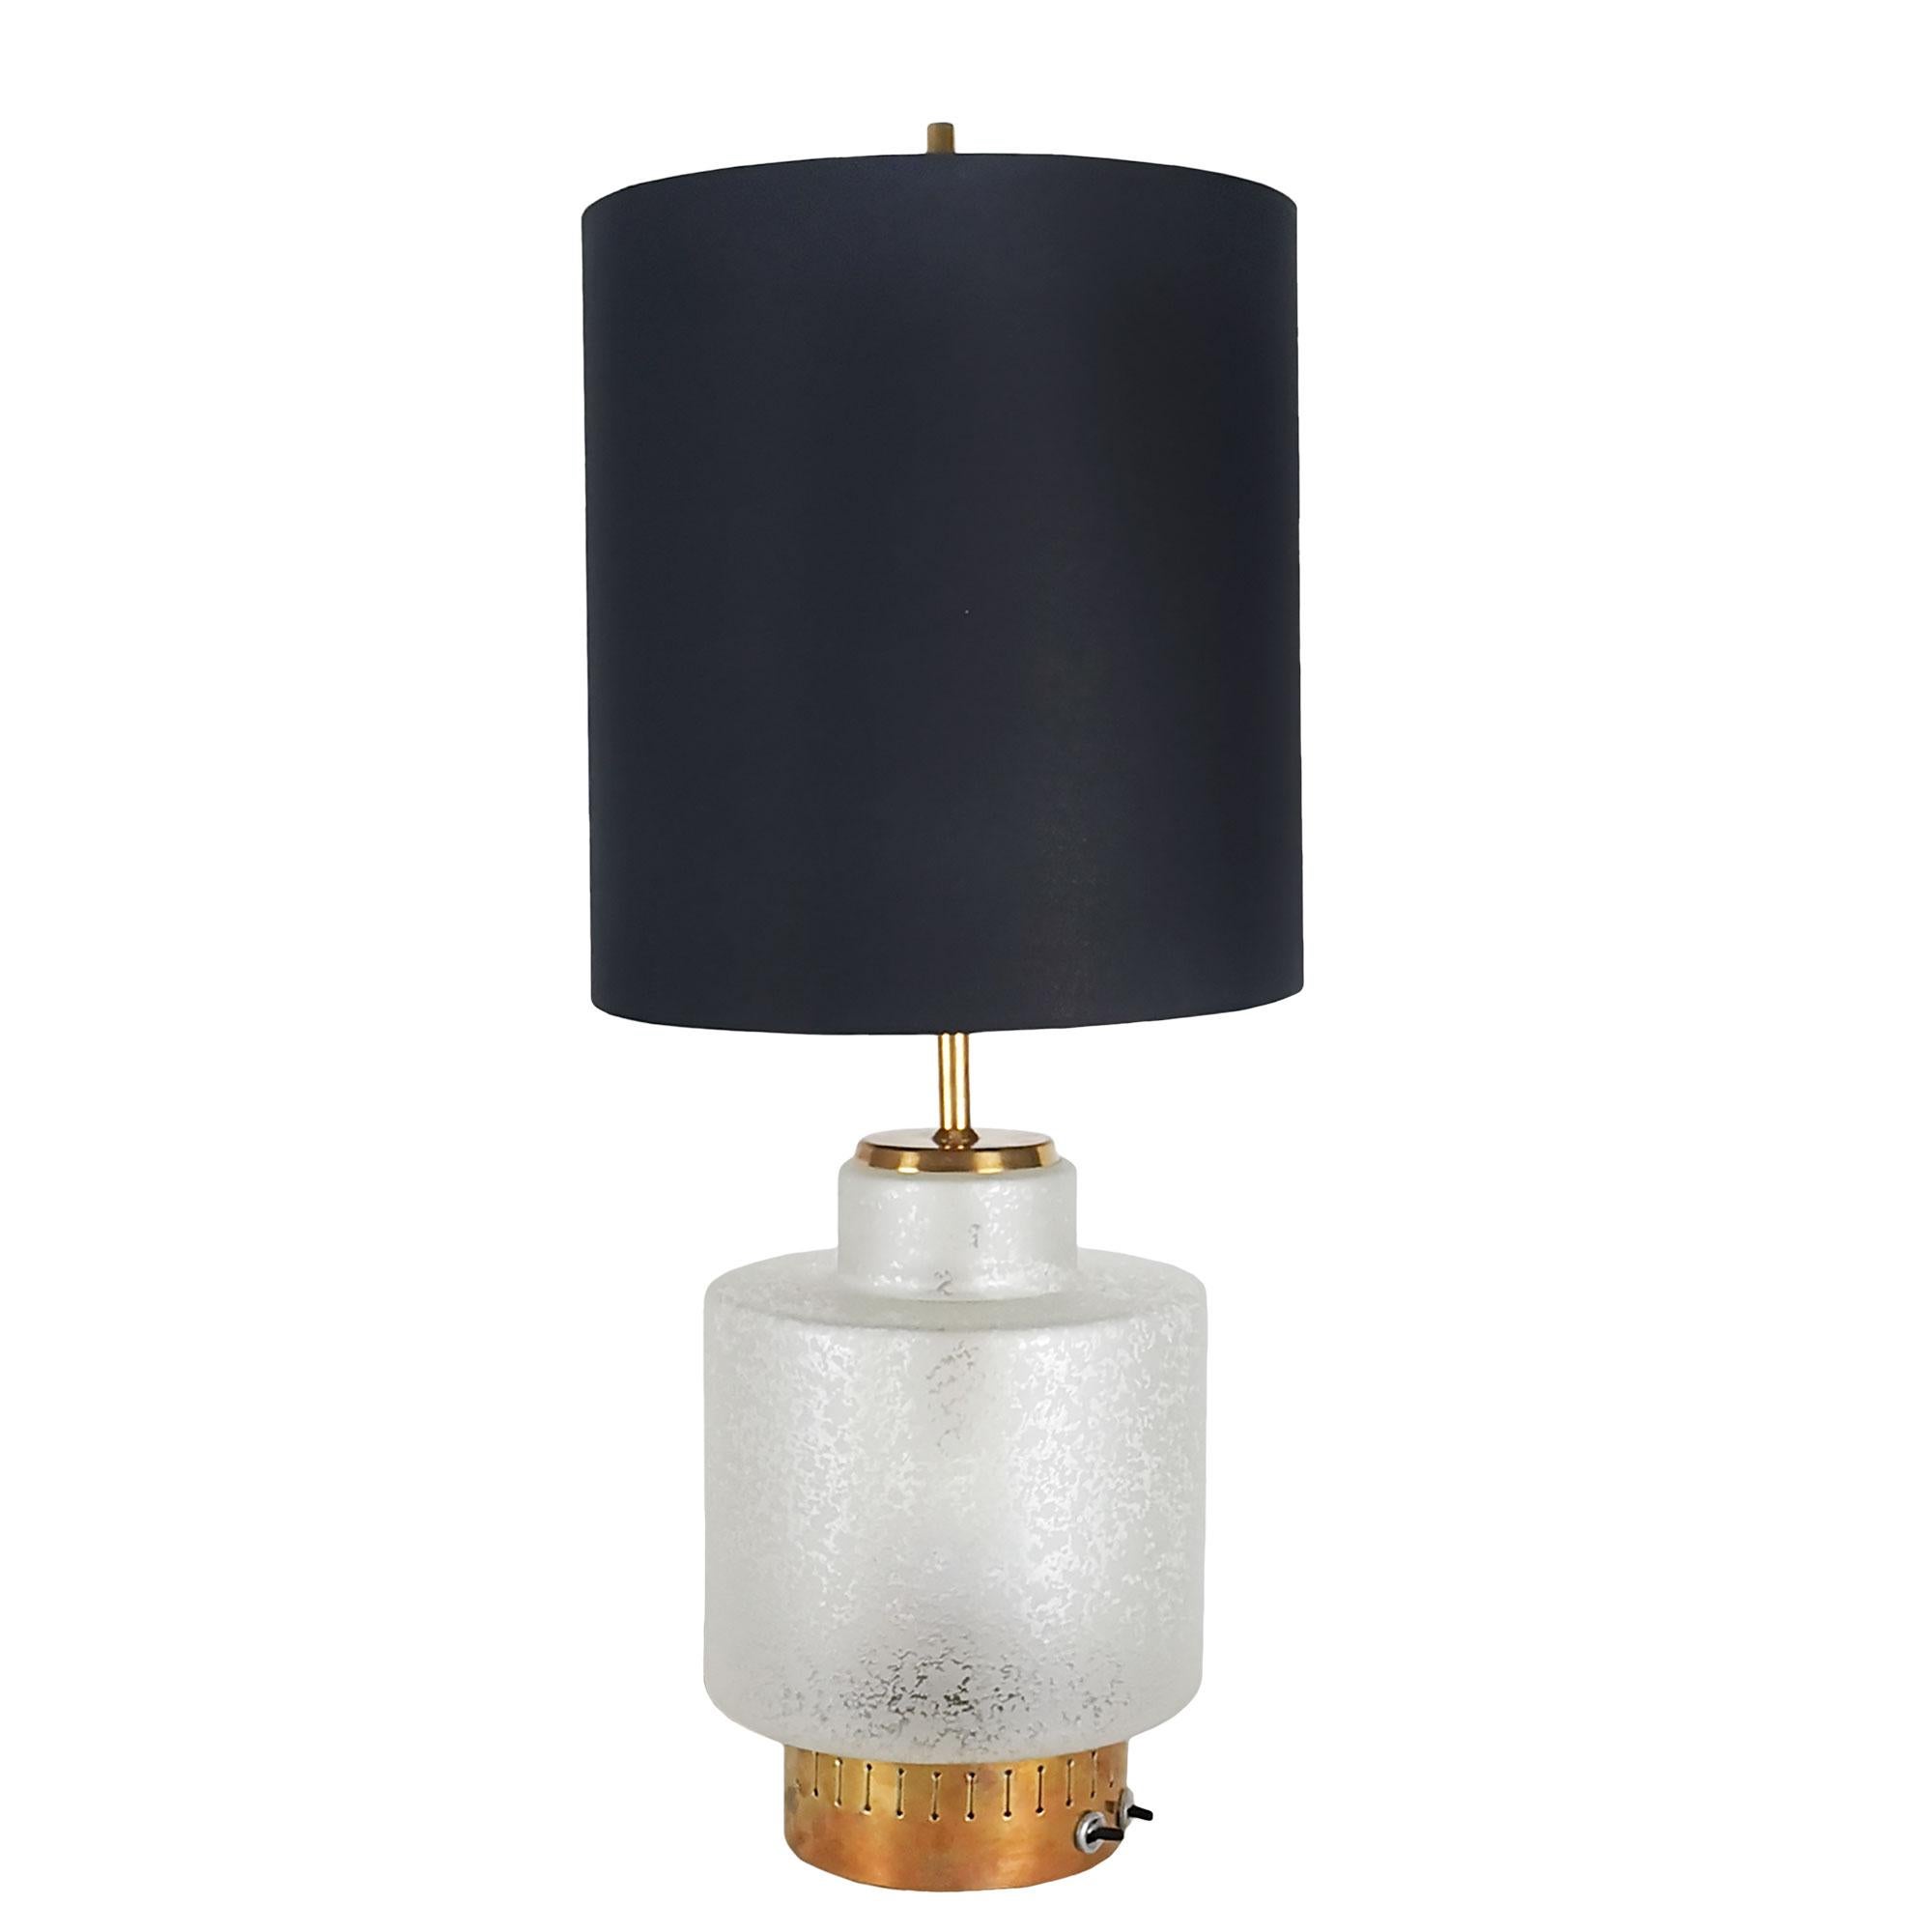 Table lamp with polished brass structure and acid worked glass, double lighting system, lampshade adjustable in height by an ingenious sliding system. Lampshade redone in black fabric with golden interior. Splendid work.
Manufacturer: